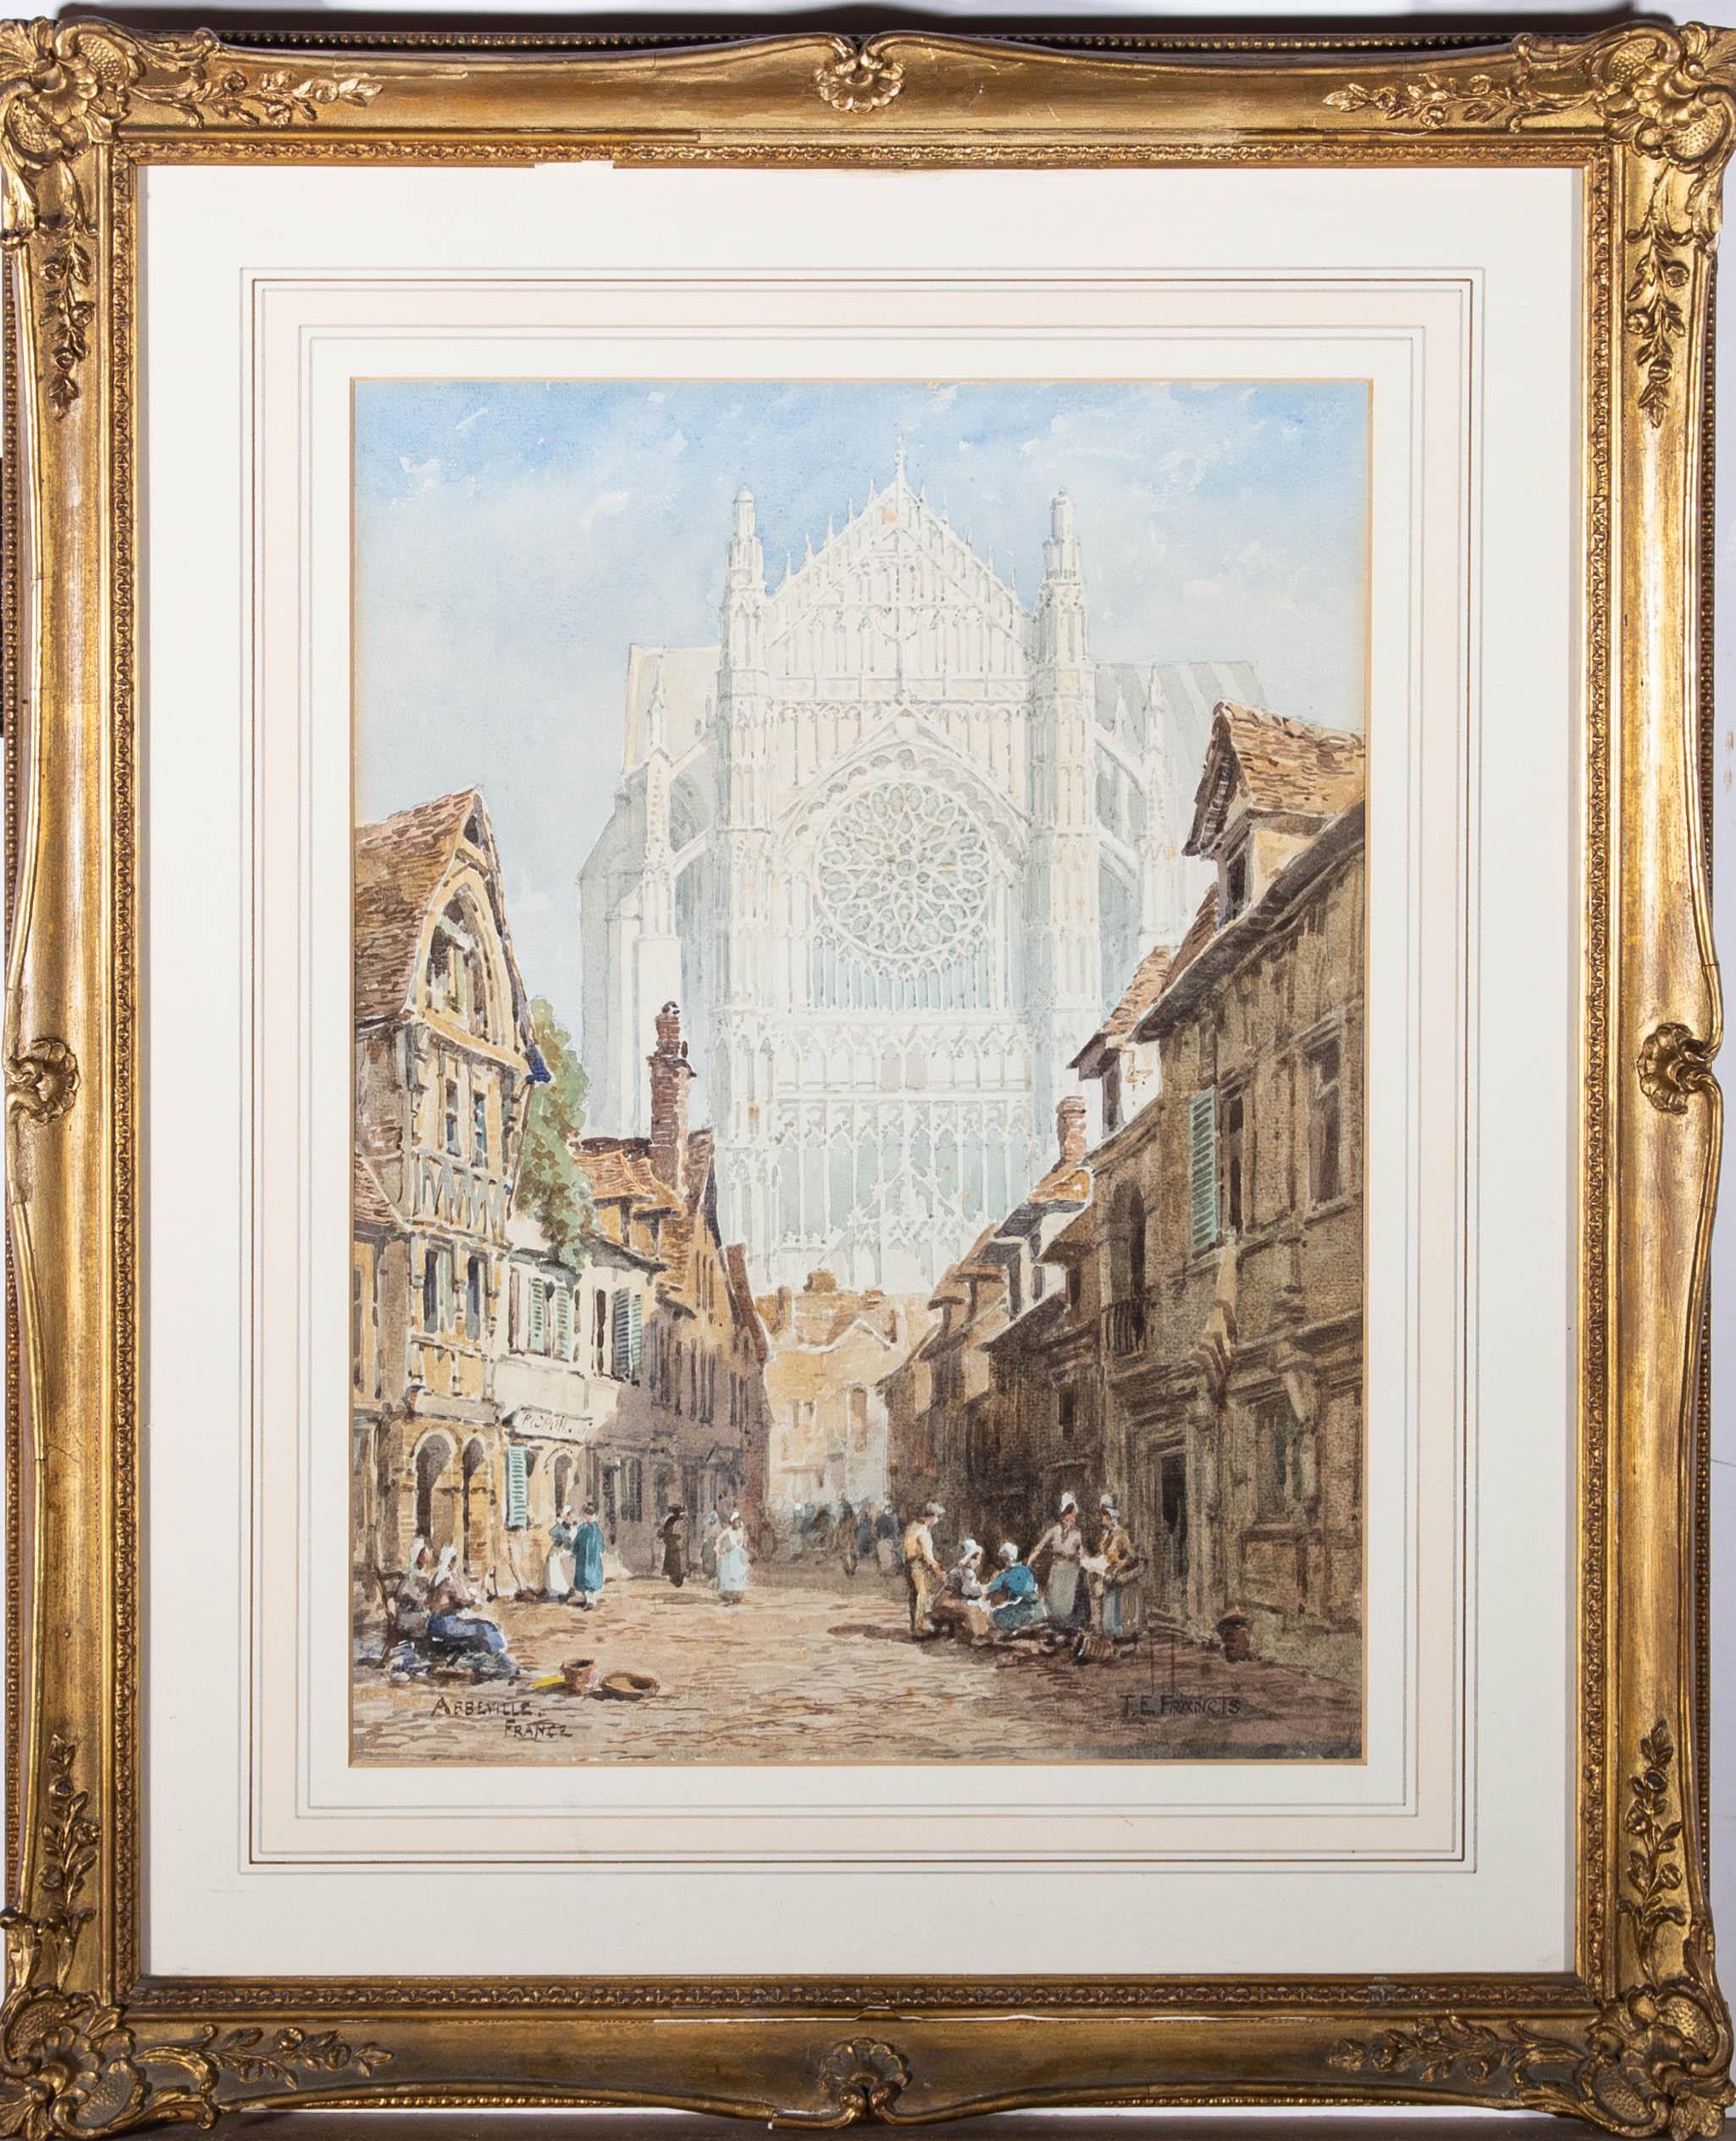 A fine street scene with the Cathedral of Saint Peter of Beauvais in the background. Presented in a wash line mount and an ornate gilt-effect wooden frame with floral and foliate moulding at the corners. Incorrectly inscribed with the location